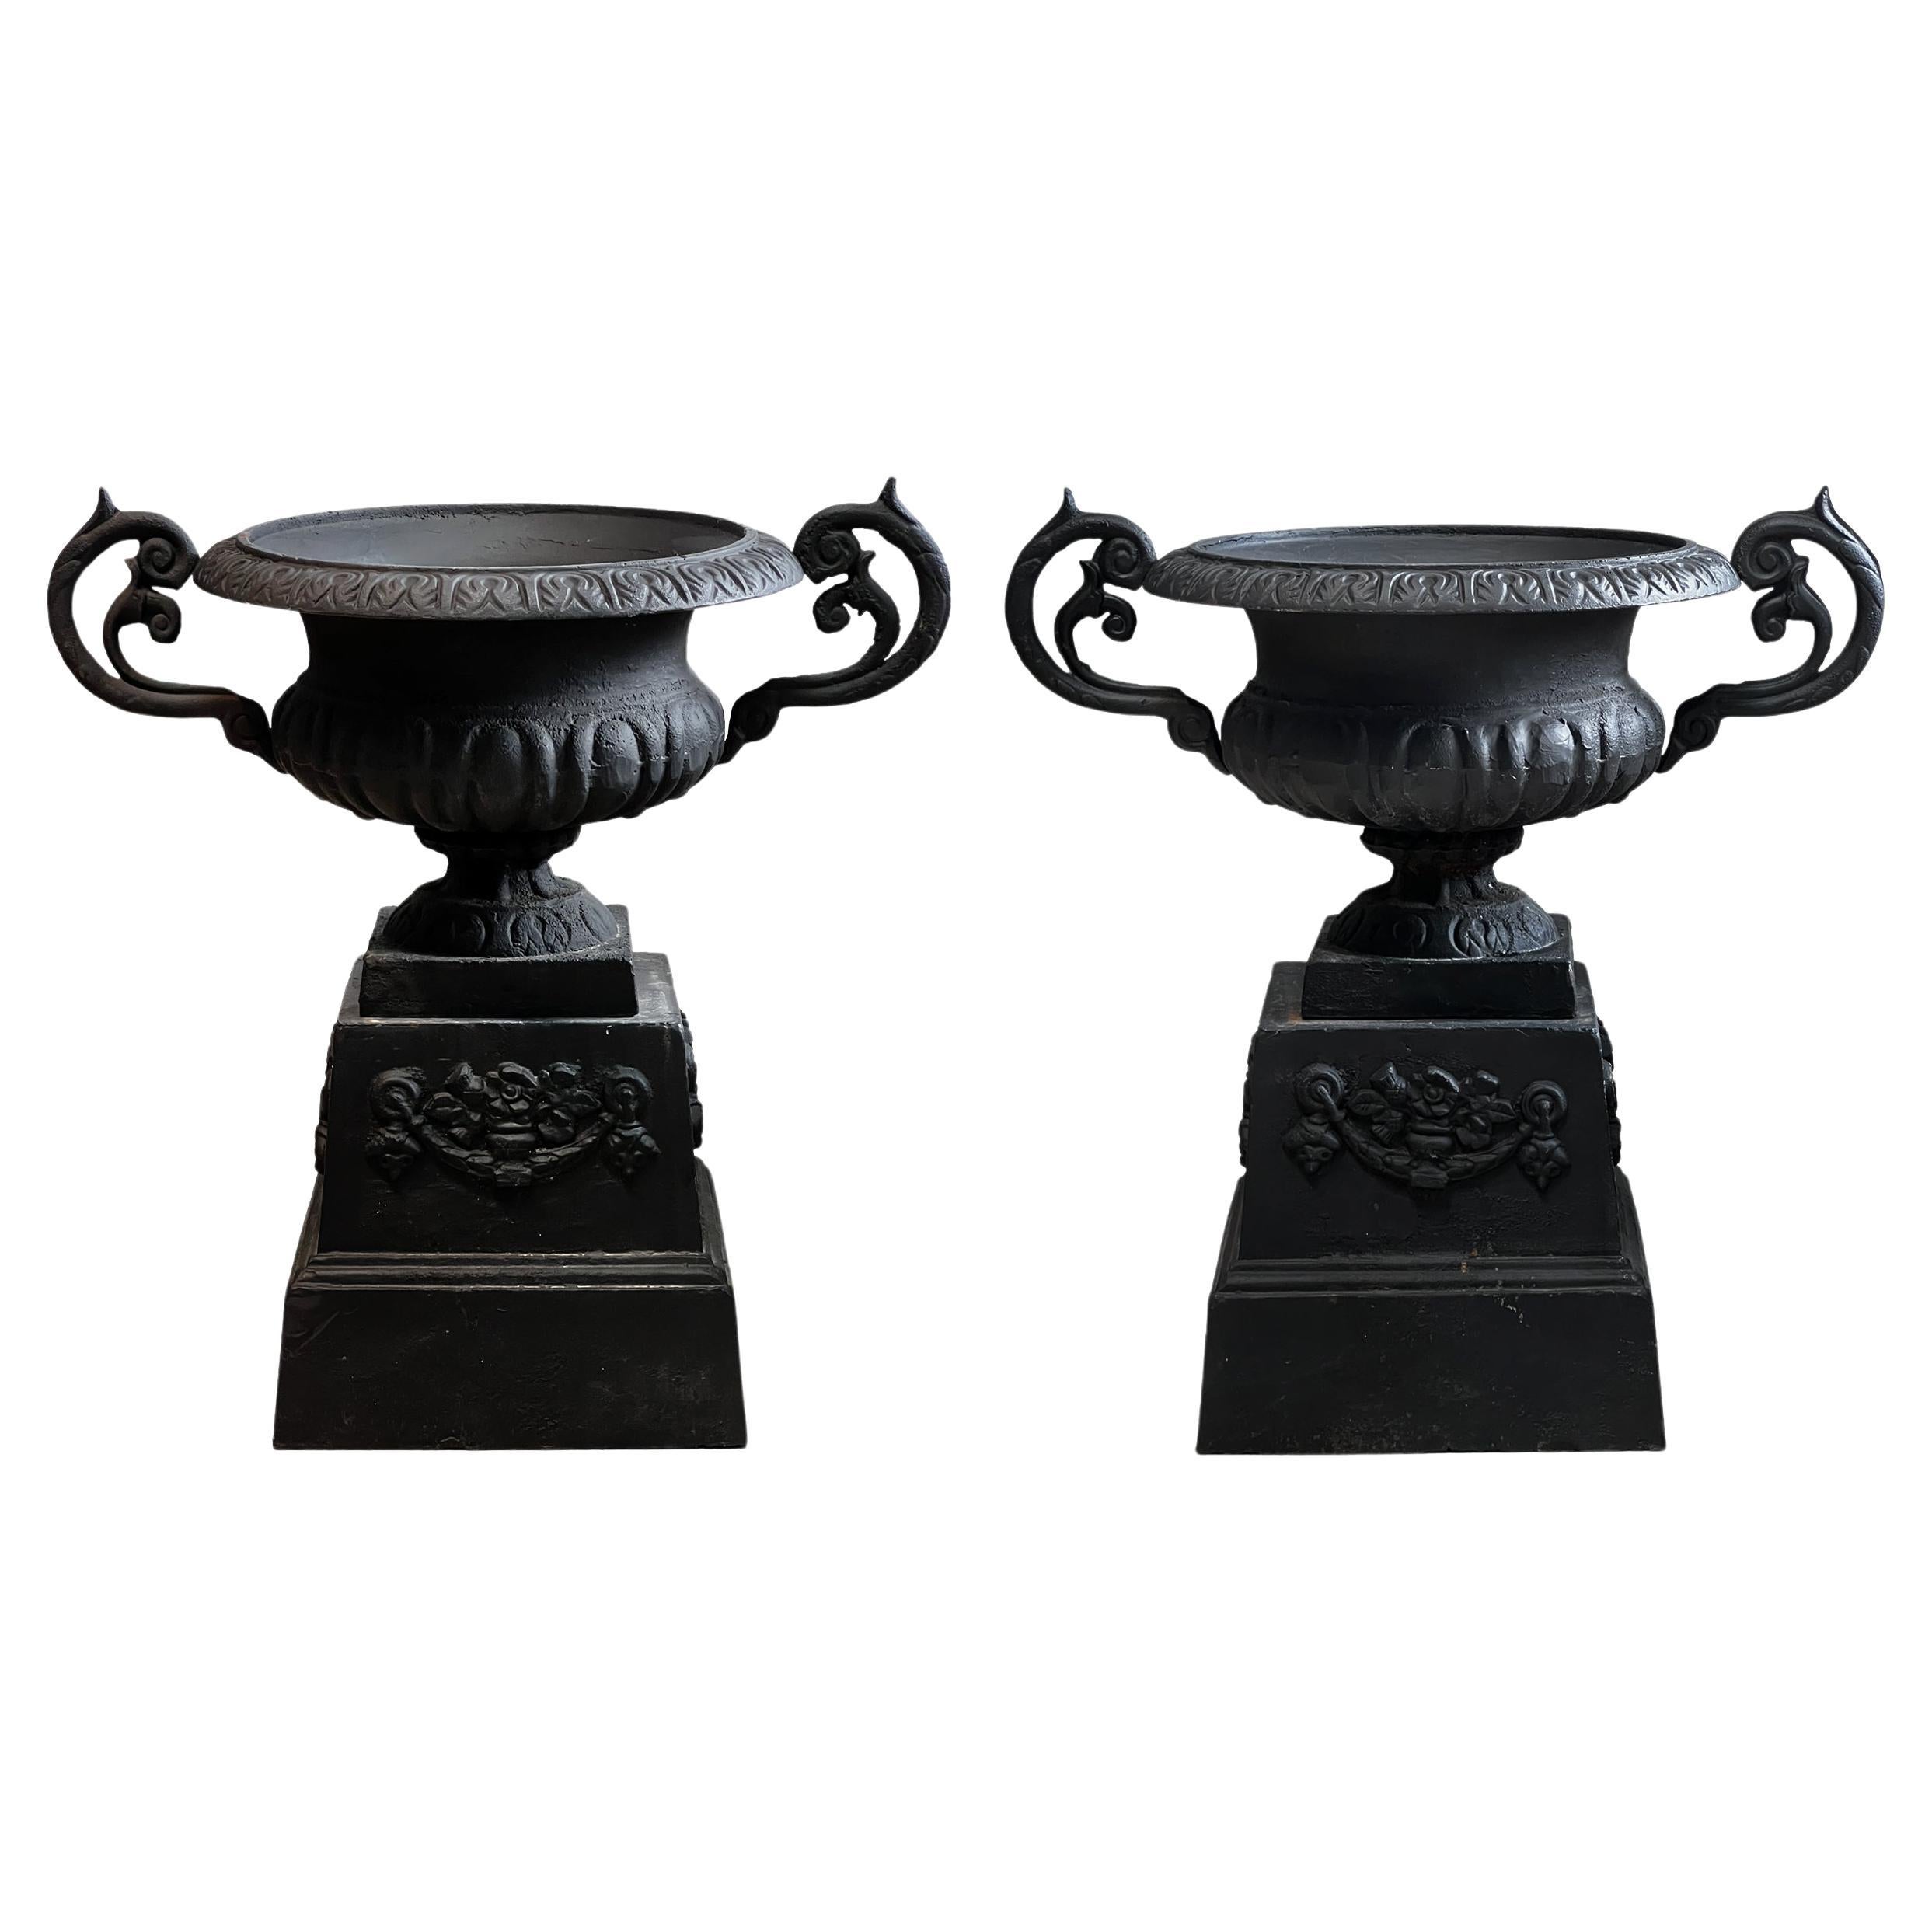 Neoclassical Black Cast Iron Urns with Base / Plinth (Set of 2)